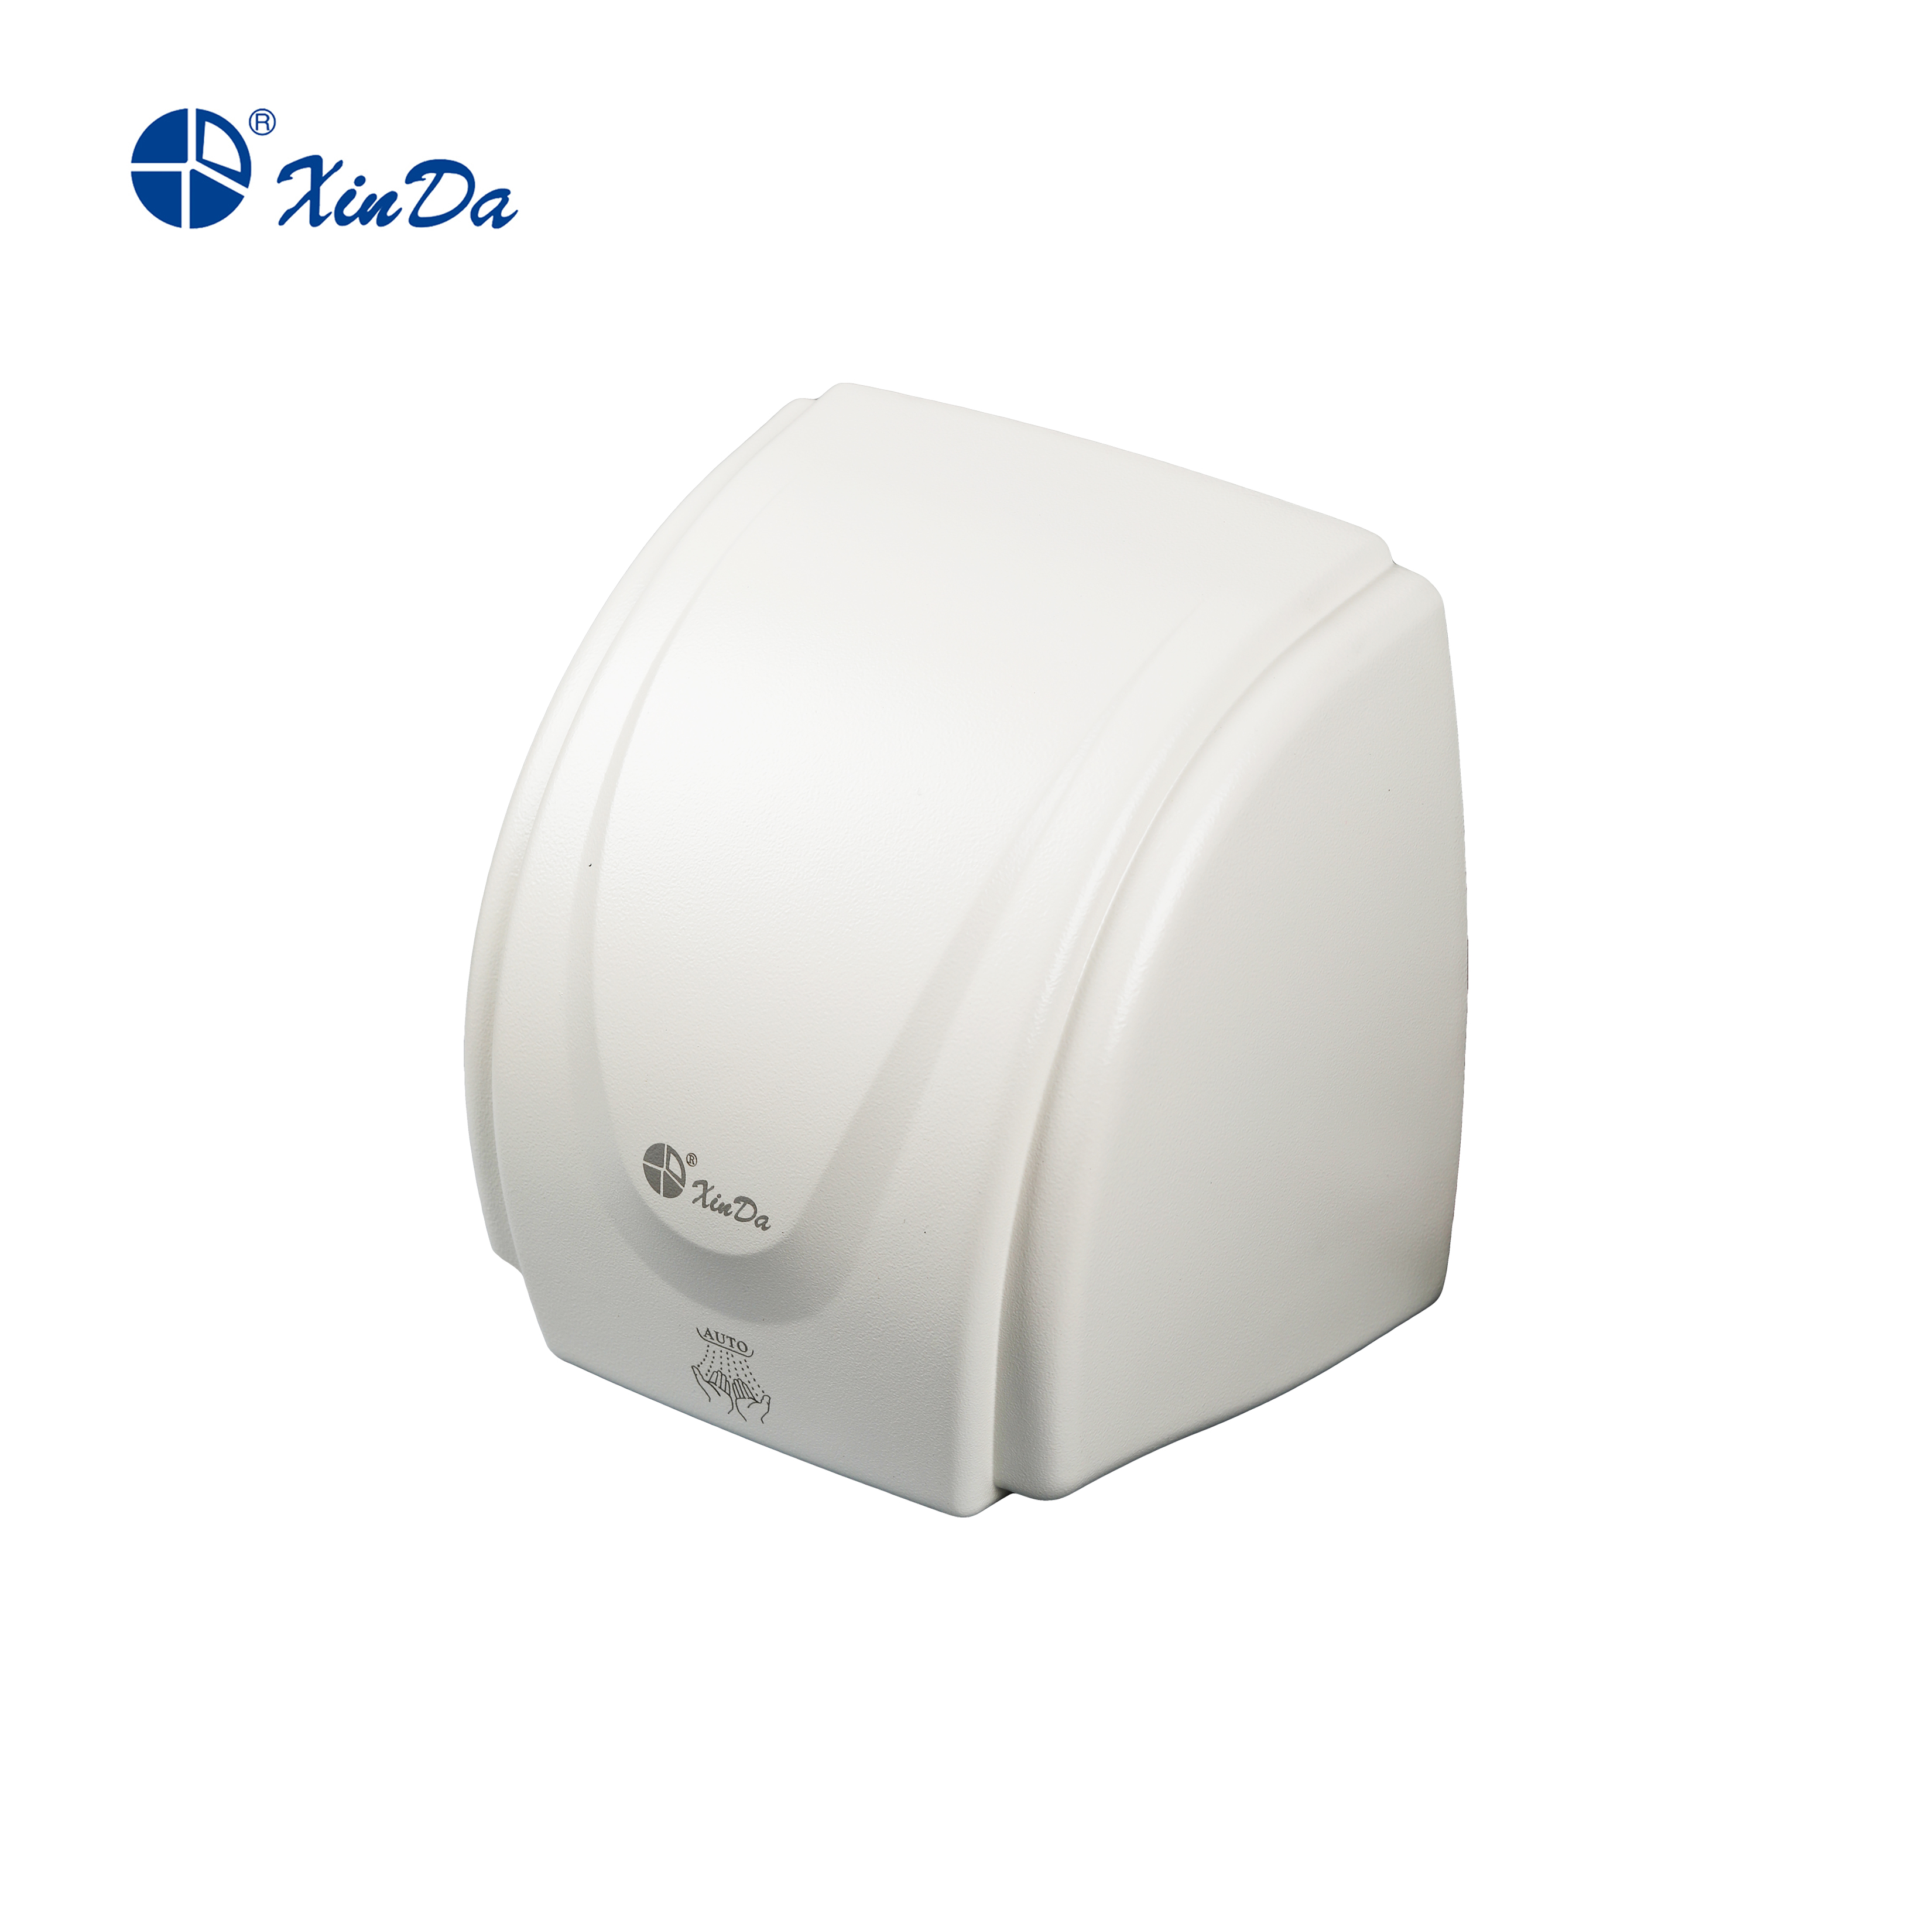 The XinDa GSX1800A Hotel automatic sensor professional hand dryer automatic white plastic body wall mounted Hand Dryer